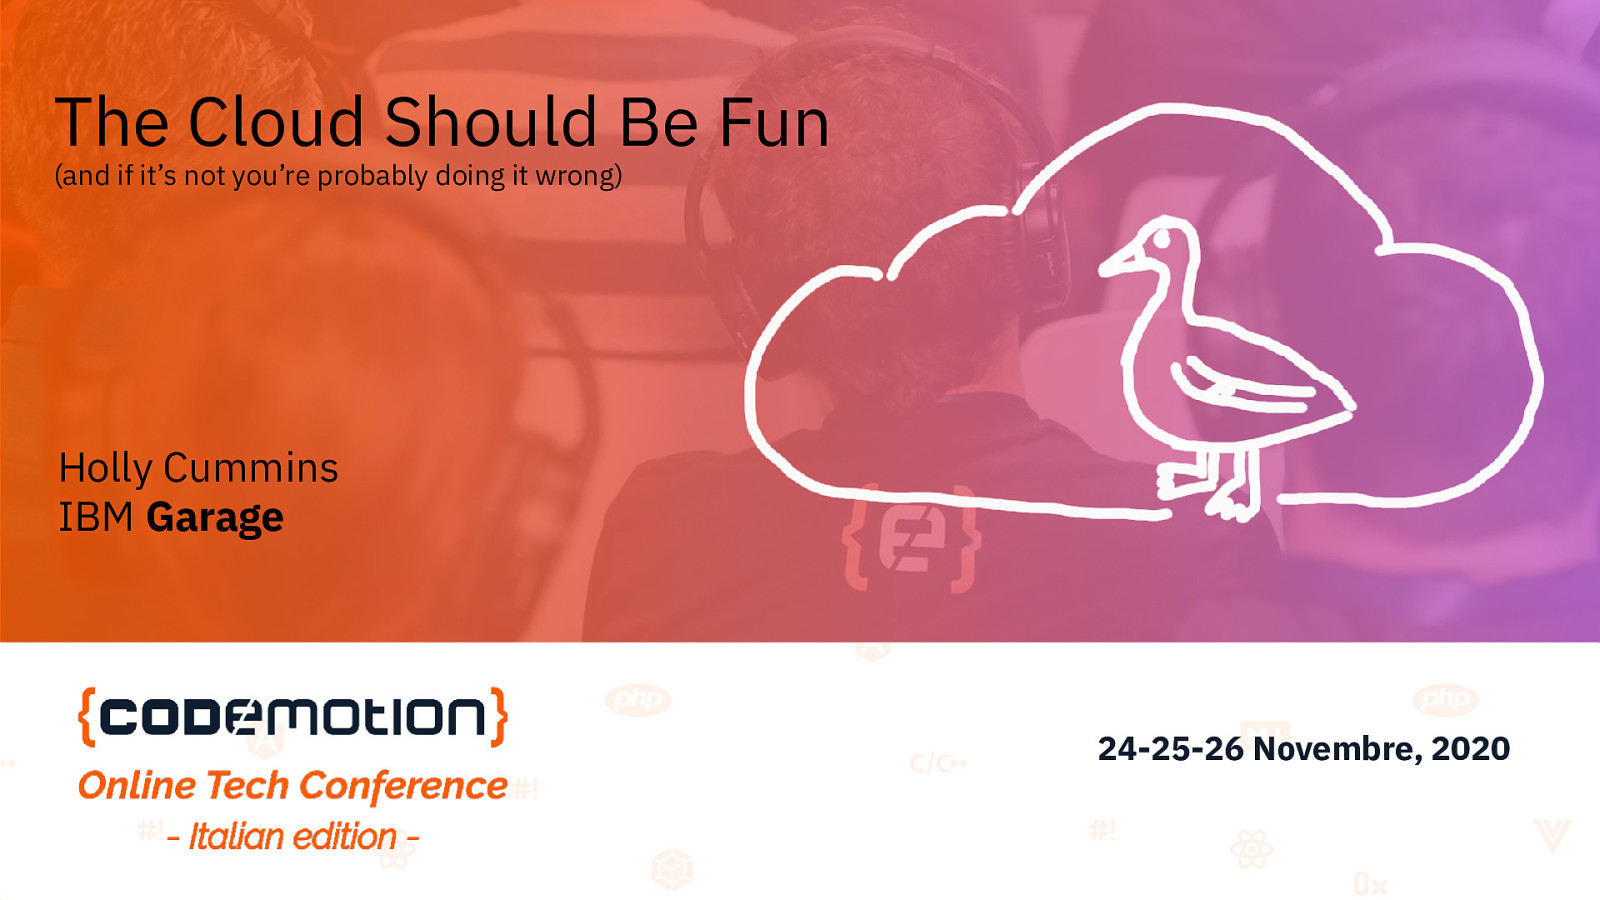 The Cloud Should Be Fun - and If It’s Not You’re Probably Doing It Wrong (keynote)